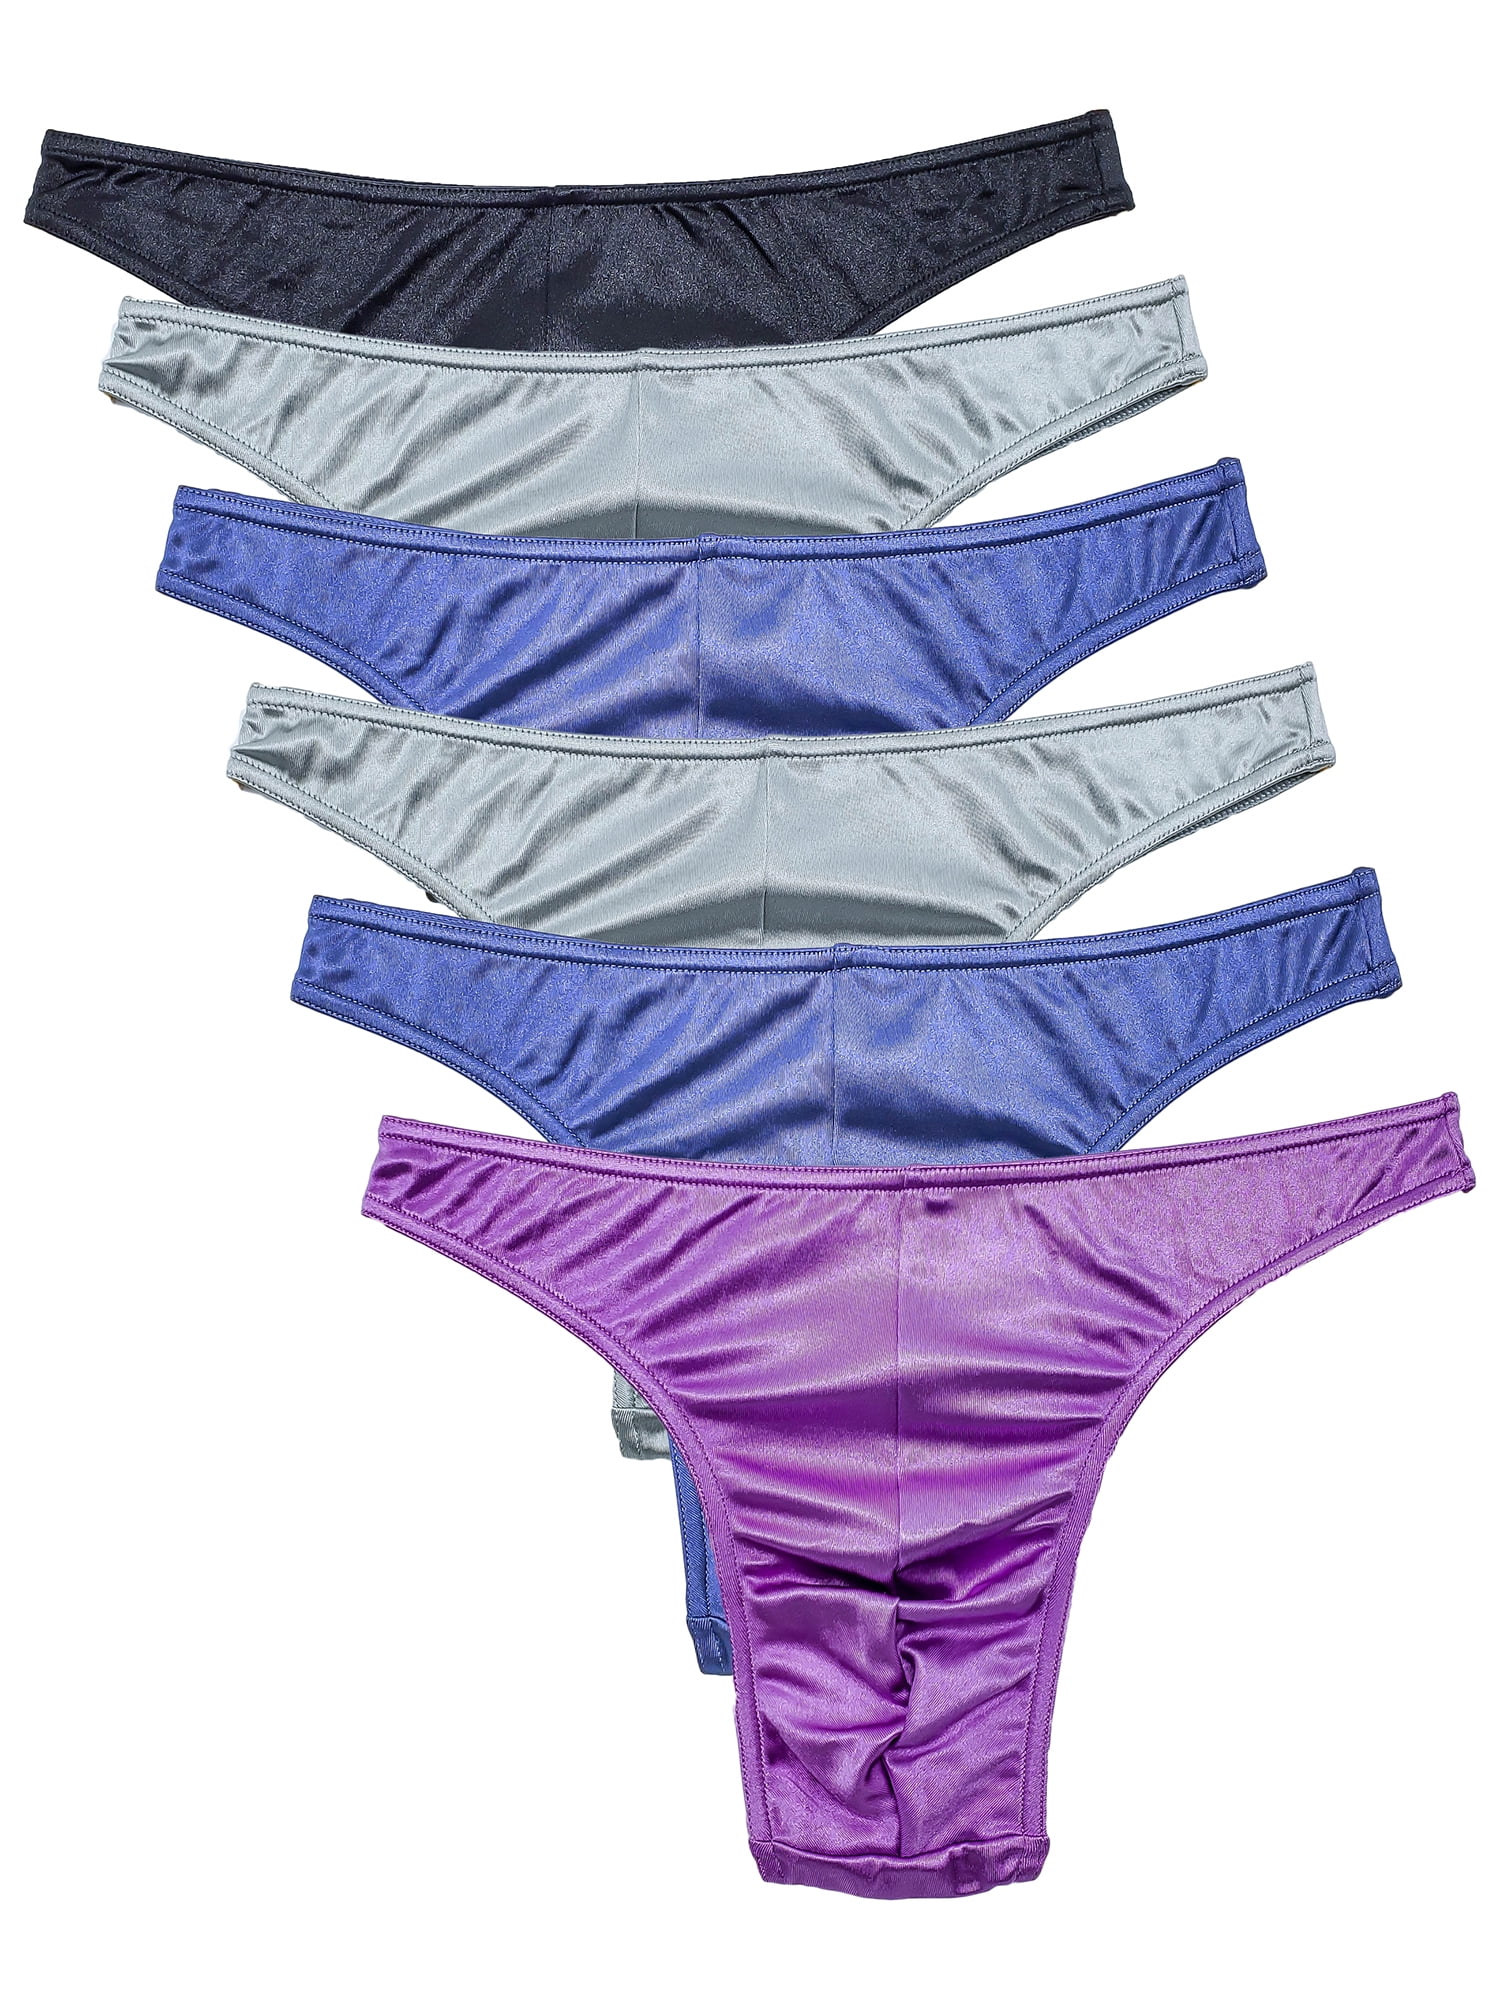 Barbra Mens Underwear Satin Silky Sexy Thong Small To Plus Sizes